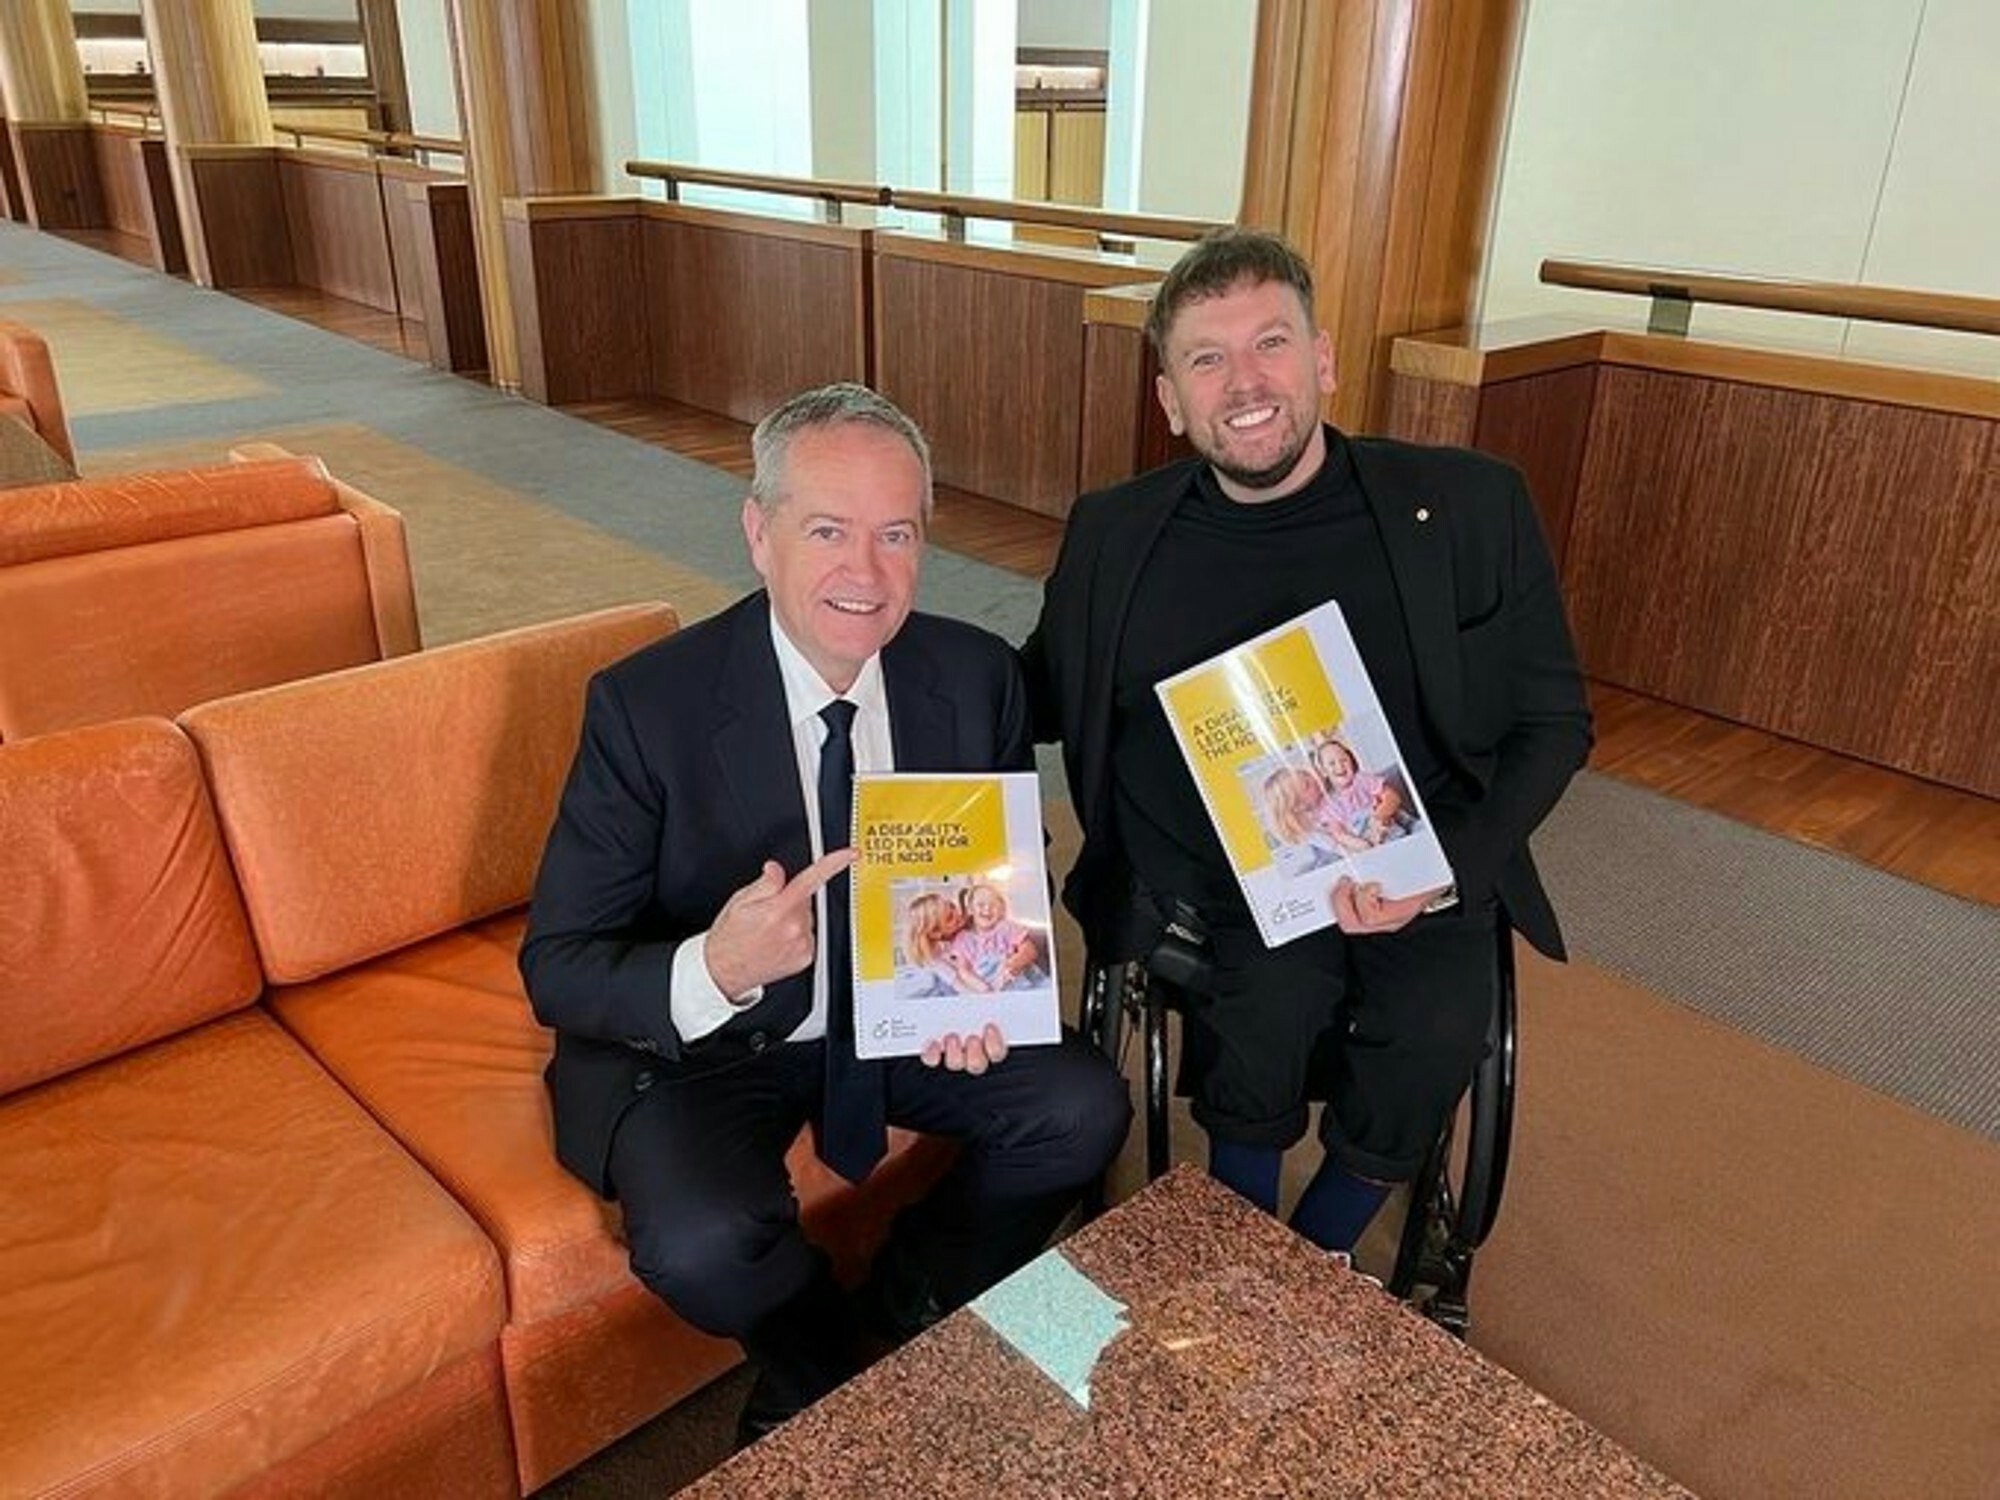 <p>NDIS Minister Bill Shorten (left) and Australian of the Year Dylan Alcott (right). [Source: Twitter]</p>
